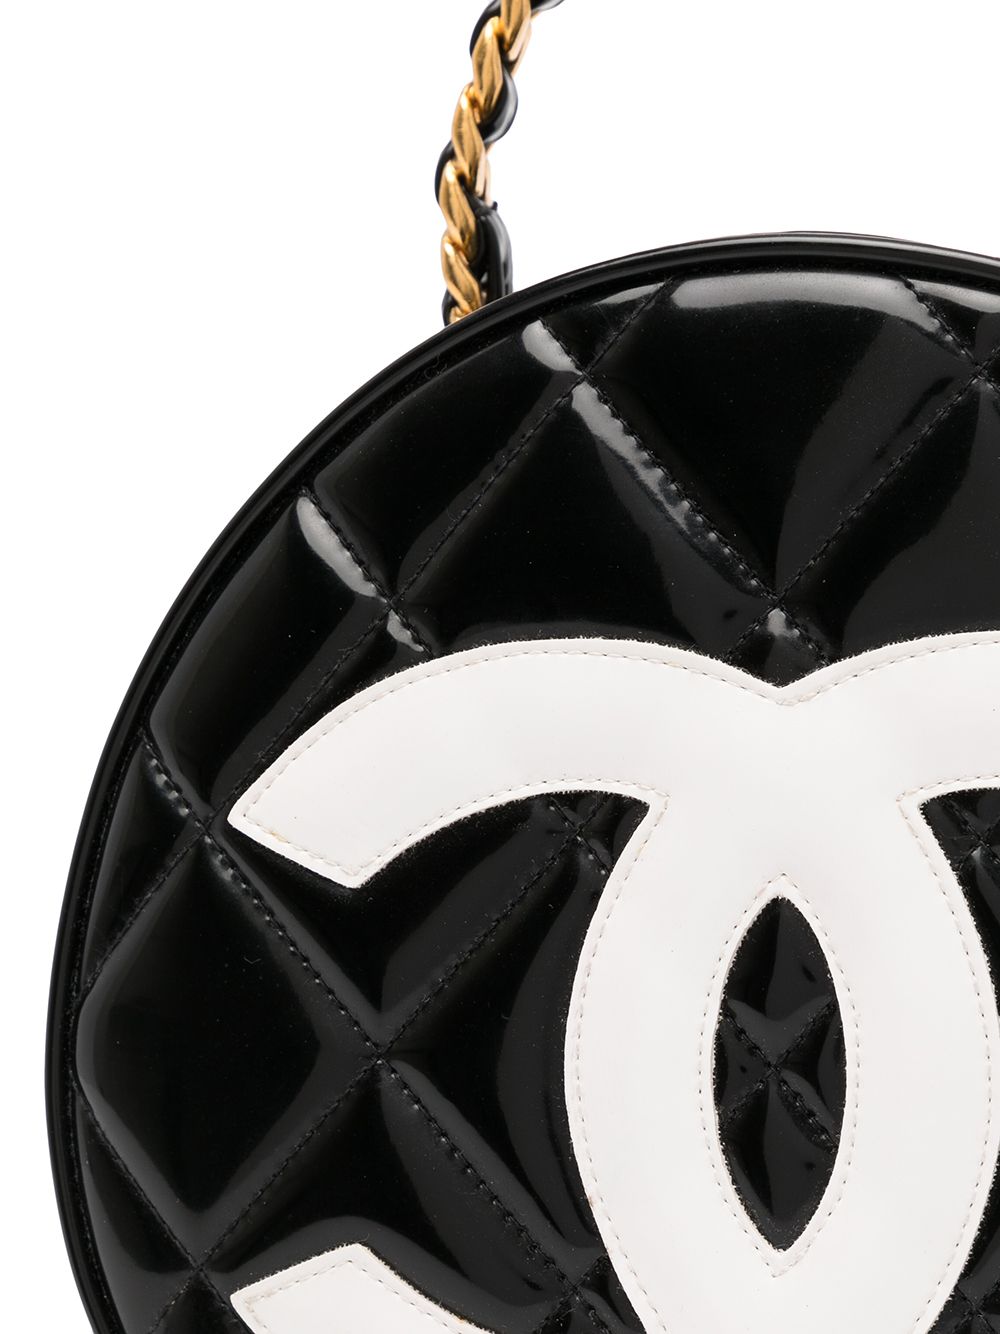 CHANEL Pre-Owned 1995 CC diamond-quilted Vanity Bag - Farfetch